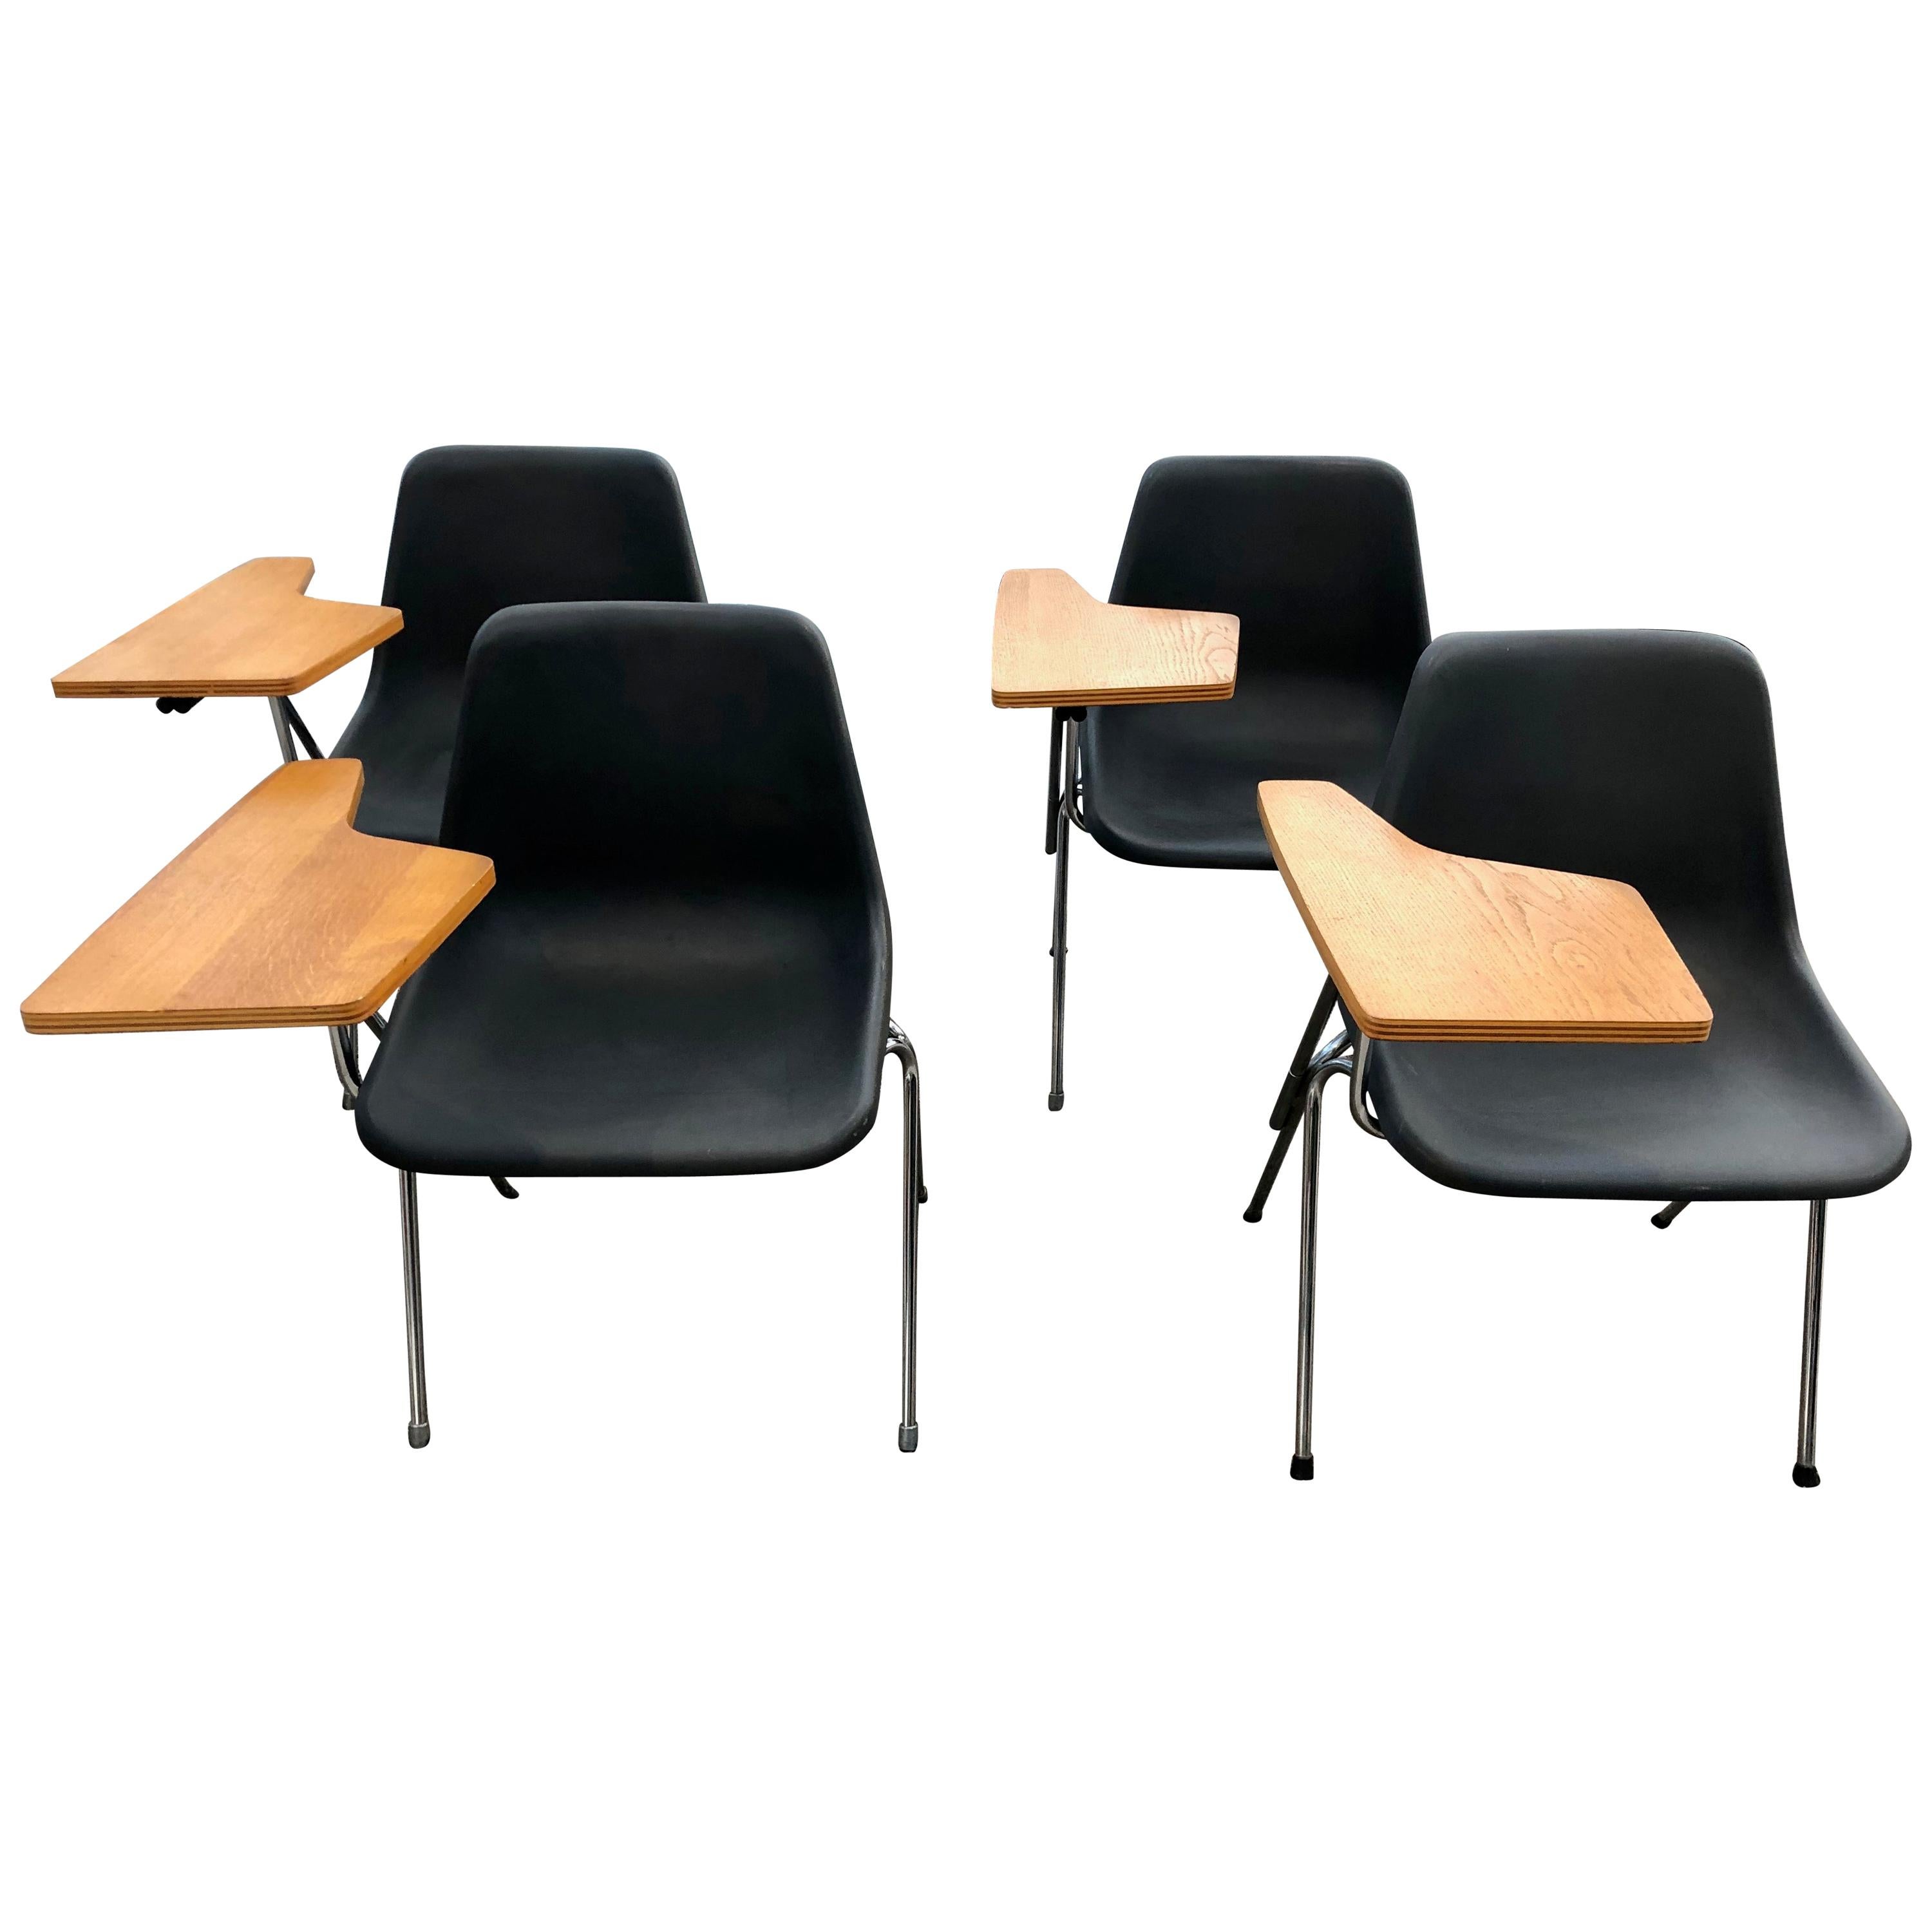 Suite of 4 Stackable Polypropylene Conference Chairs by Robin Day for Hille 1963